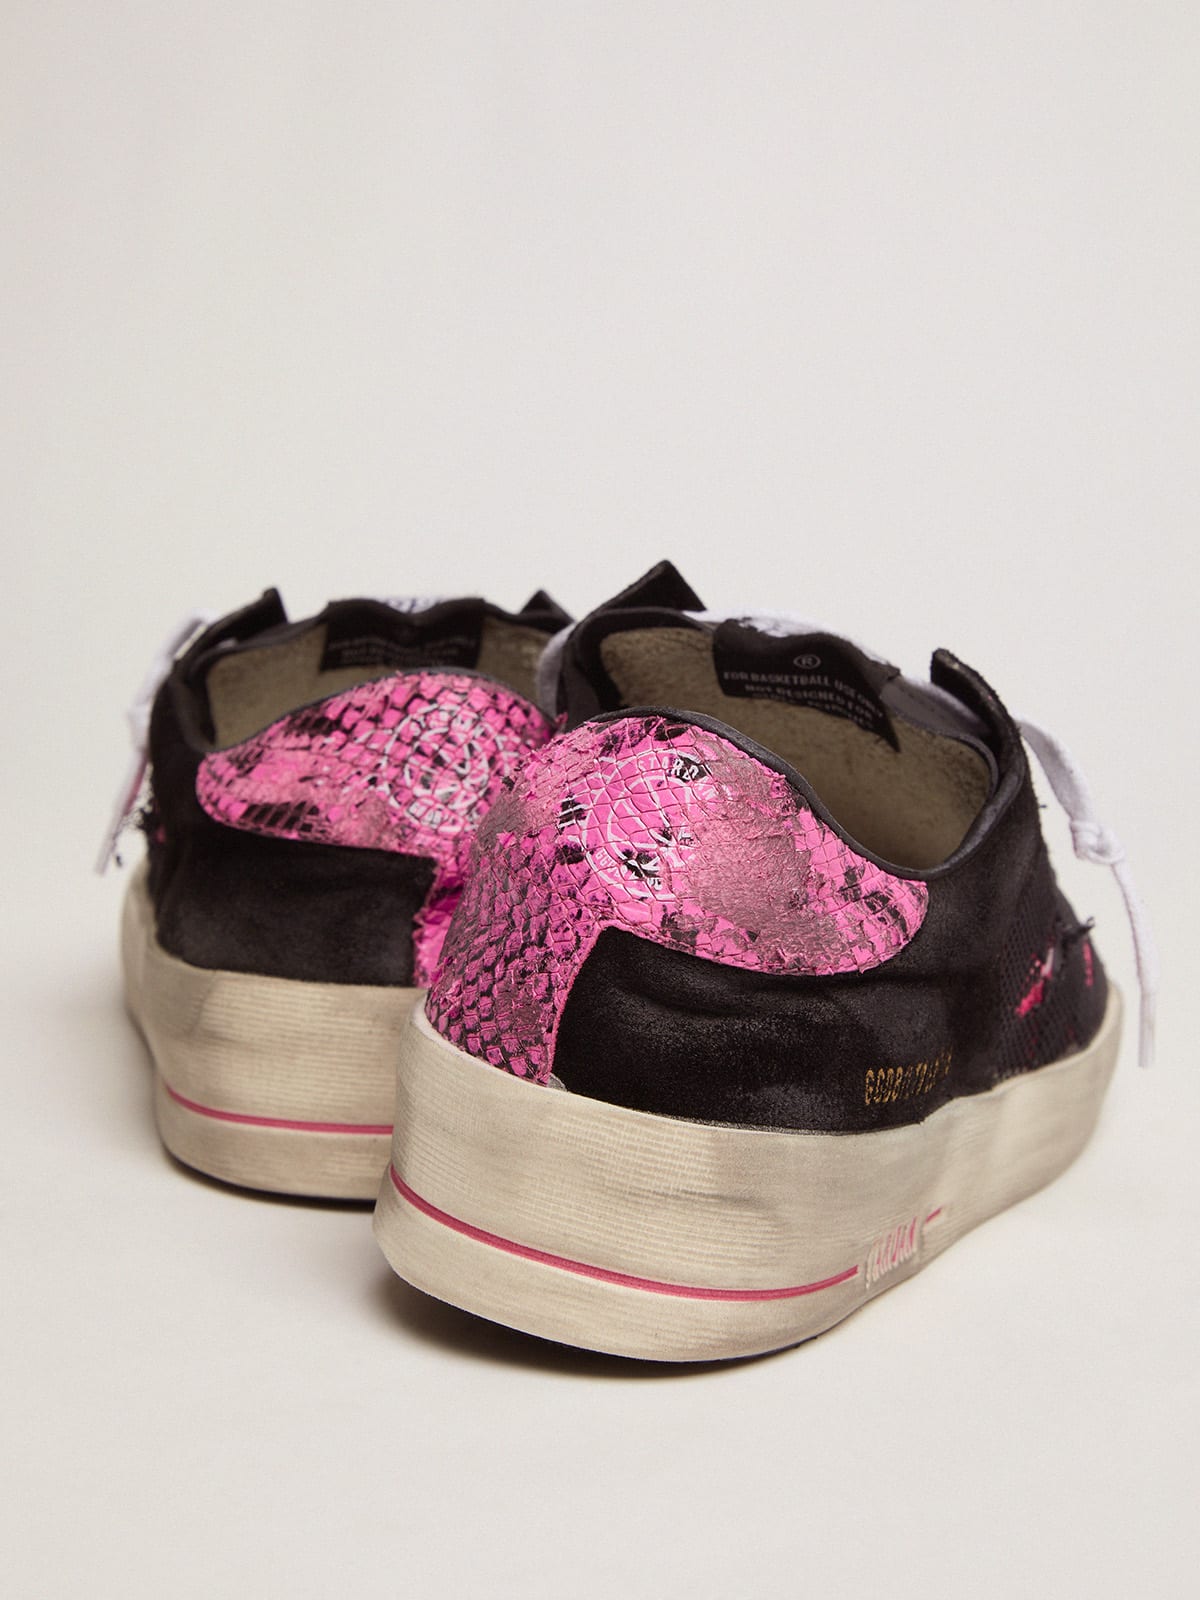 Golden Goose - Men’s fuchsia and black Limited Edition LAB Stardan sneakers in 